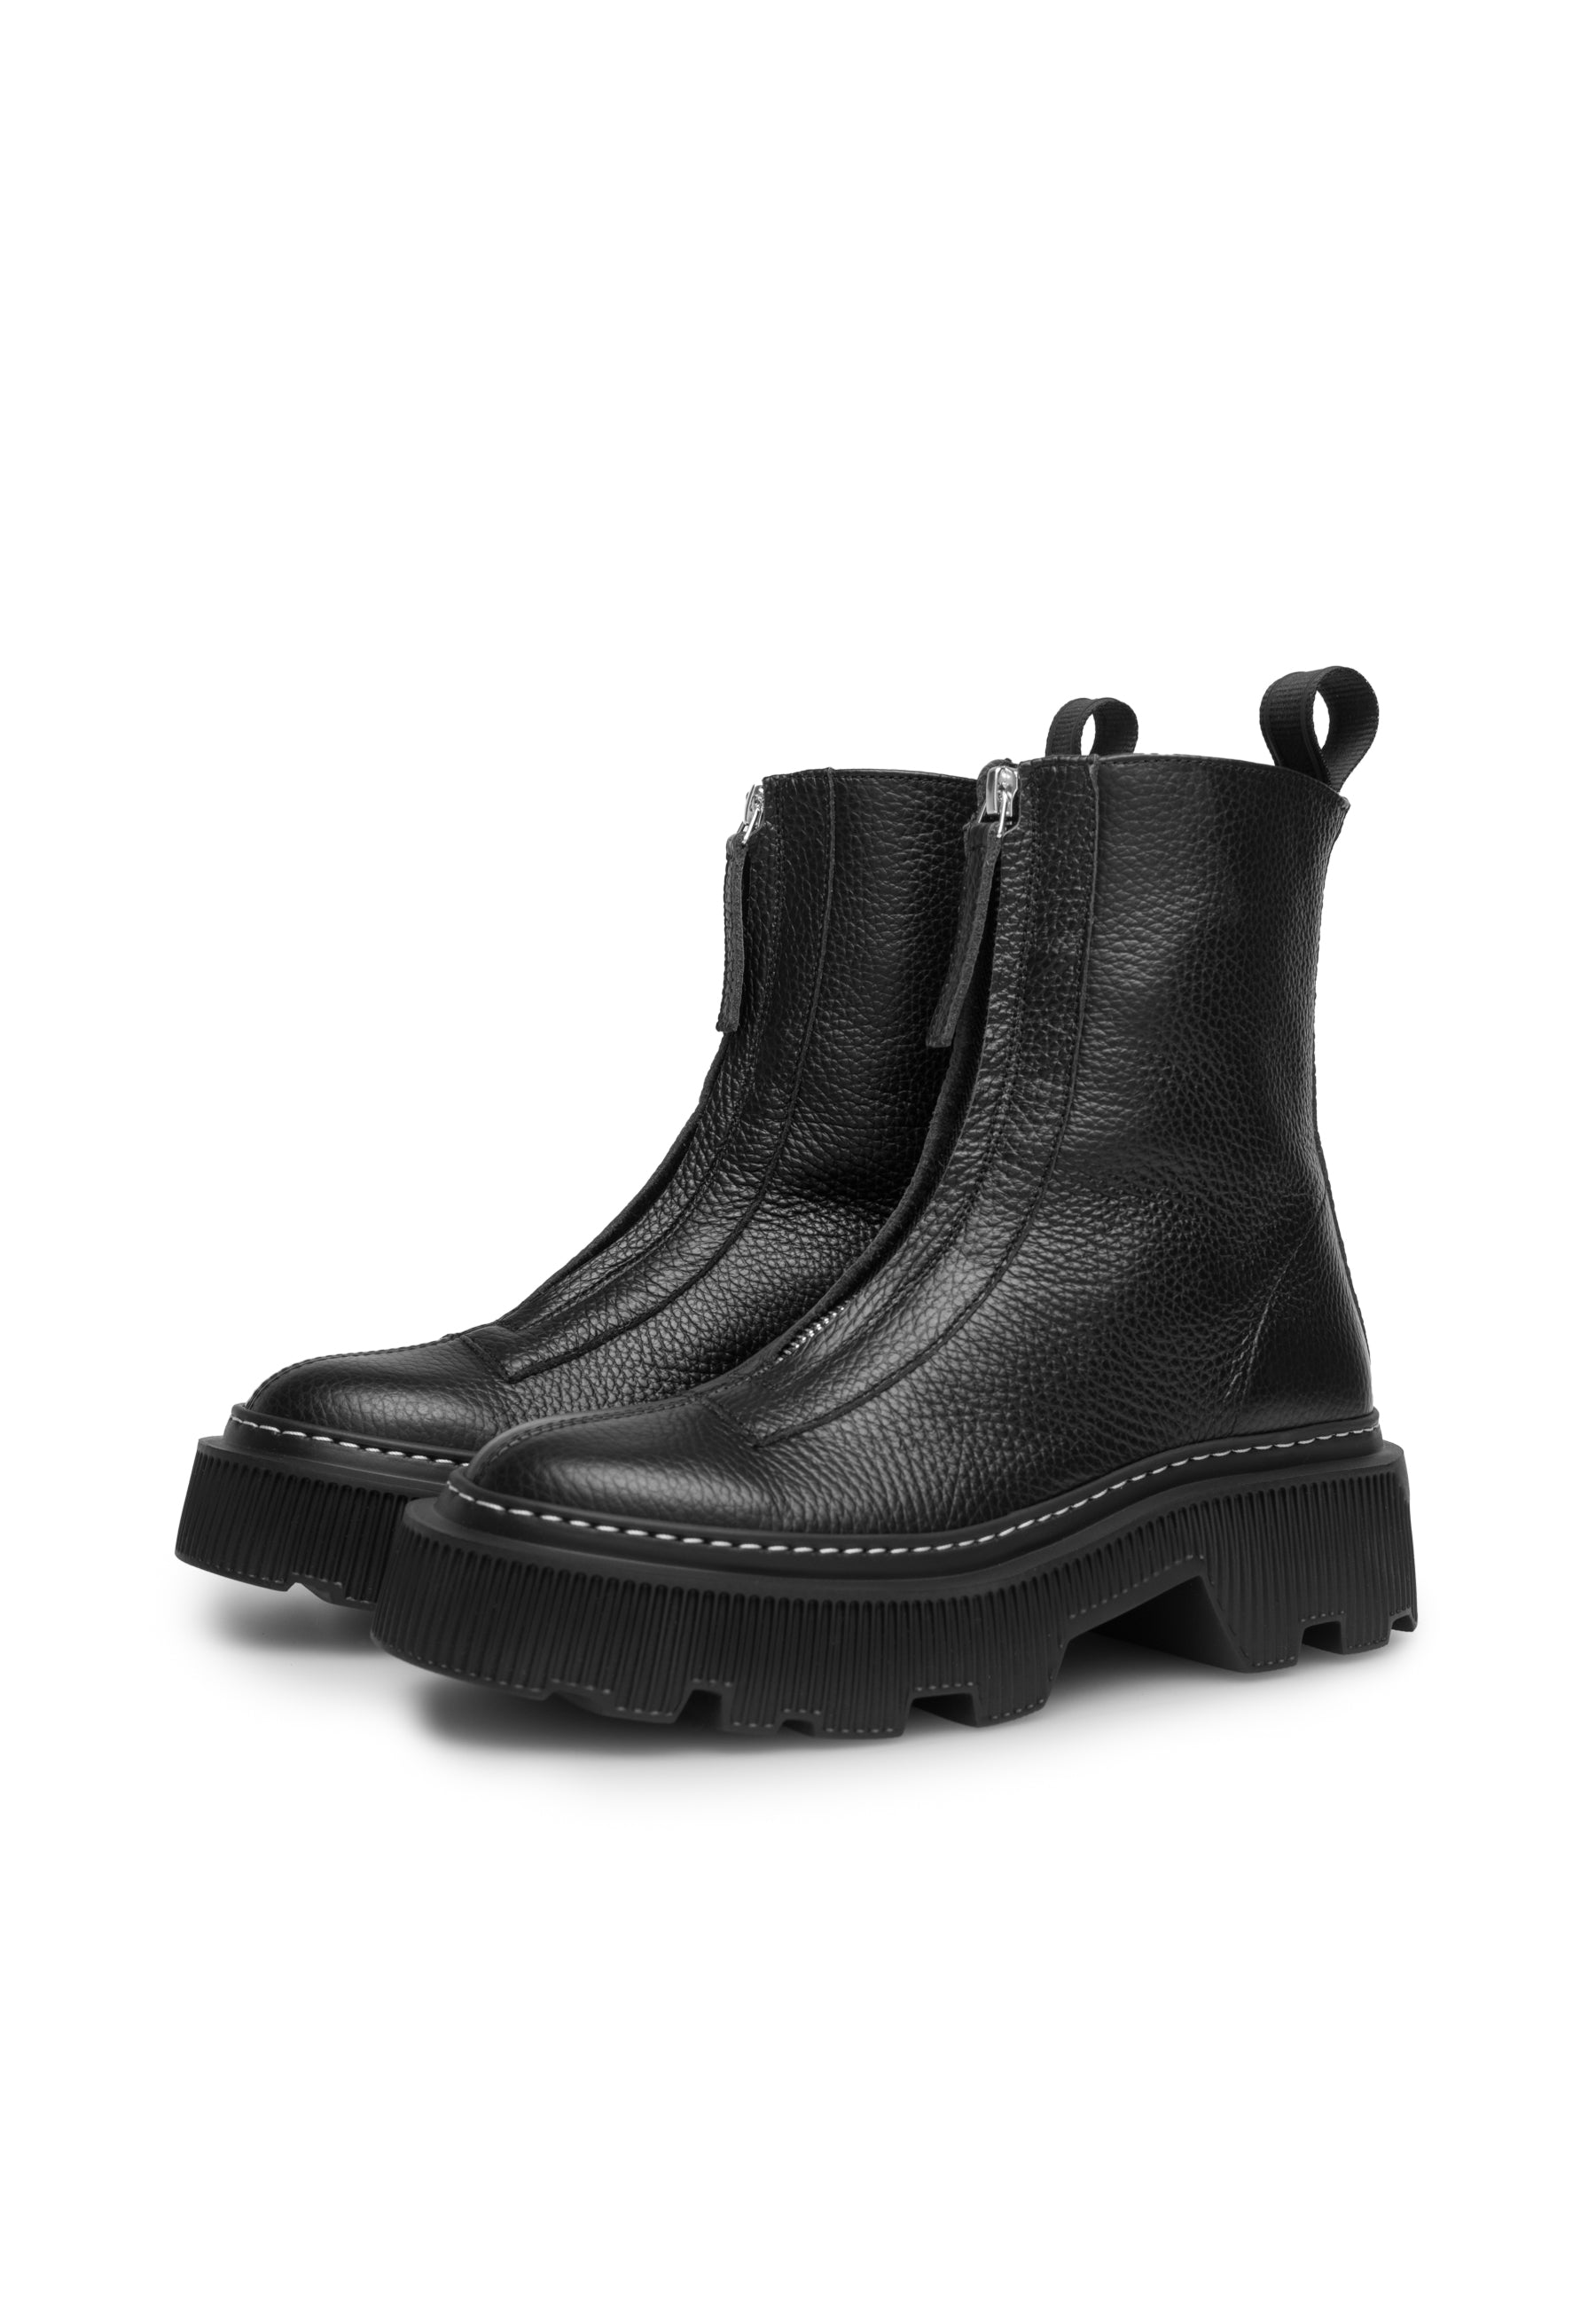 Shane Black Front Zip Leather Boots LAST1701 - 3